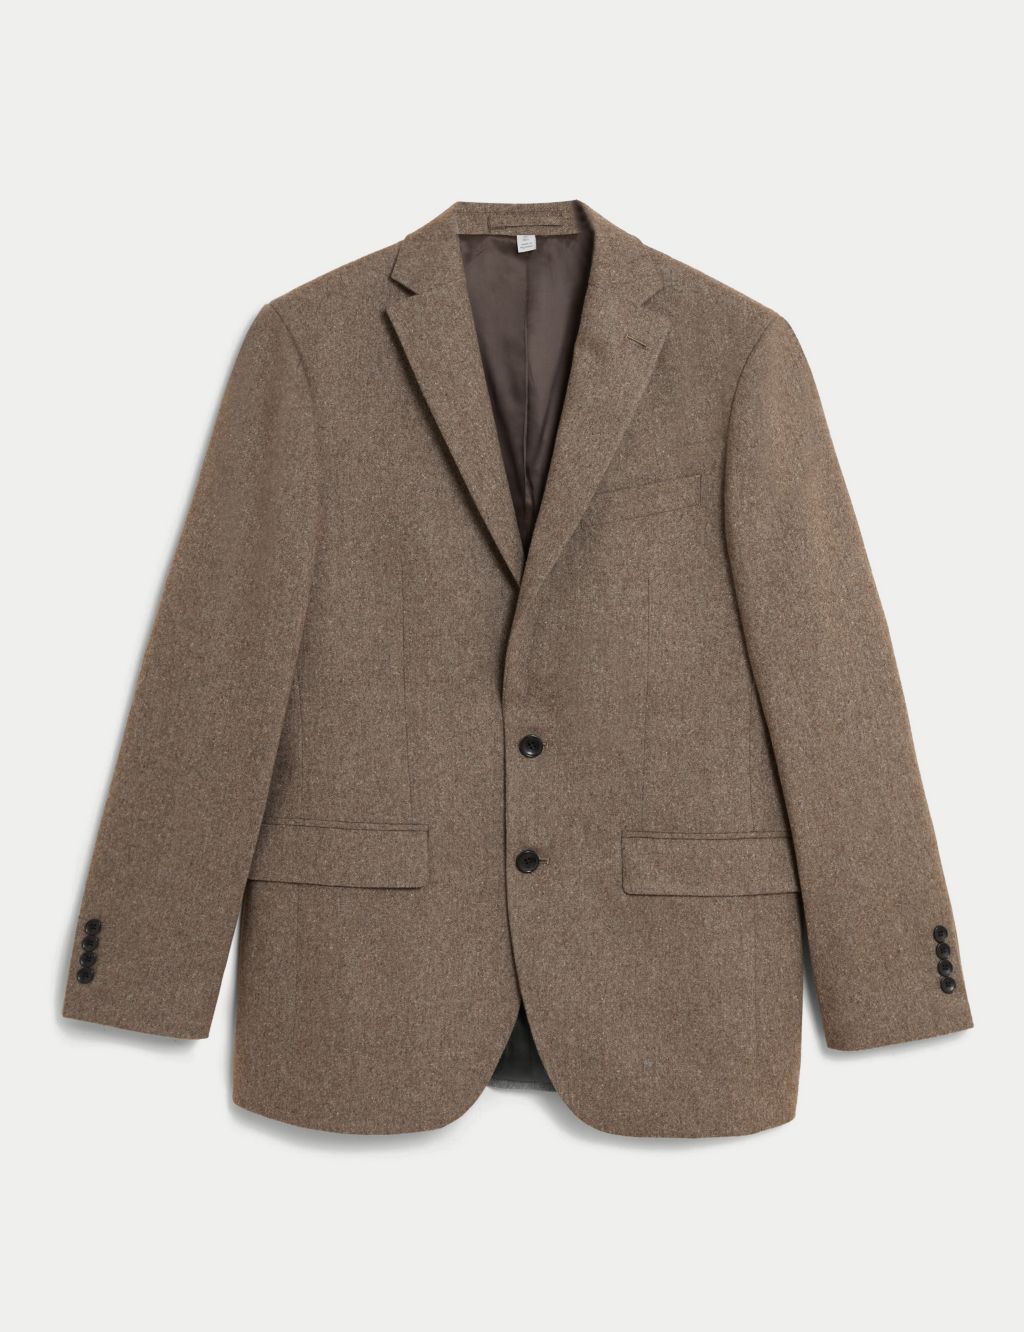 Tailored Fit Wool Rich Donegal Suit Jacket image 2